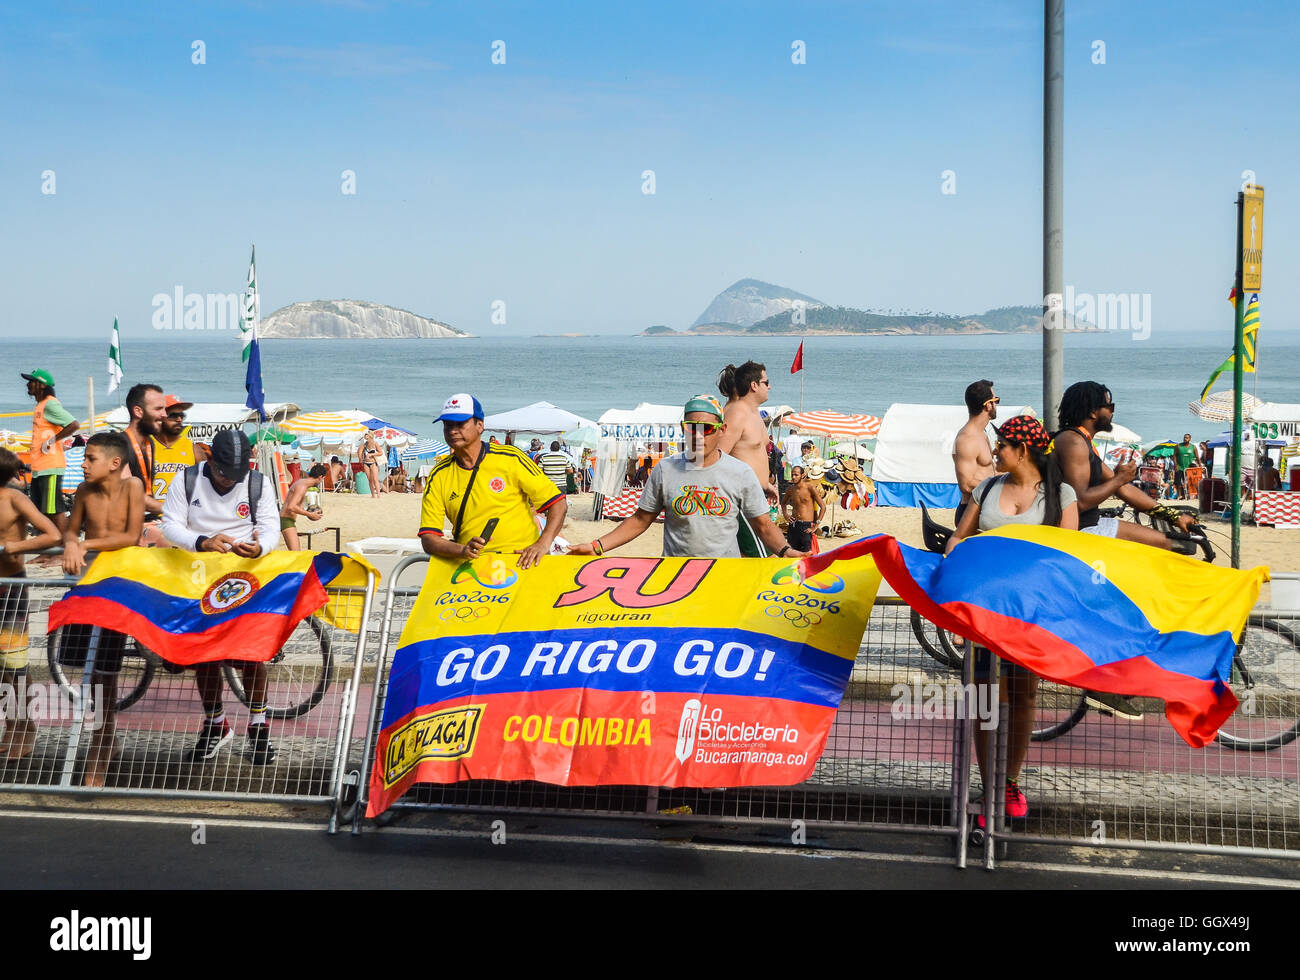 Colombian fans enjoy a day out on Ipanema beach in Rio de Janeiro, Brazil during the Rio 2016 Olympics Stock Photo